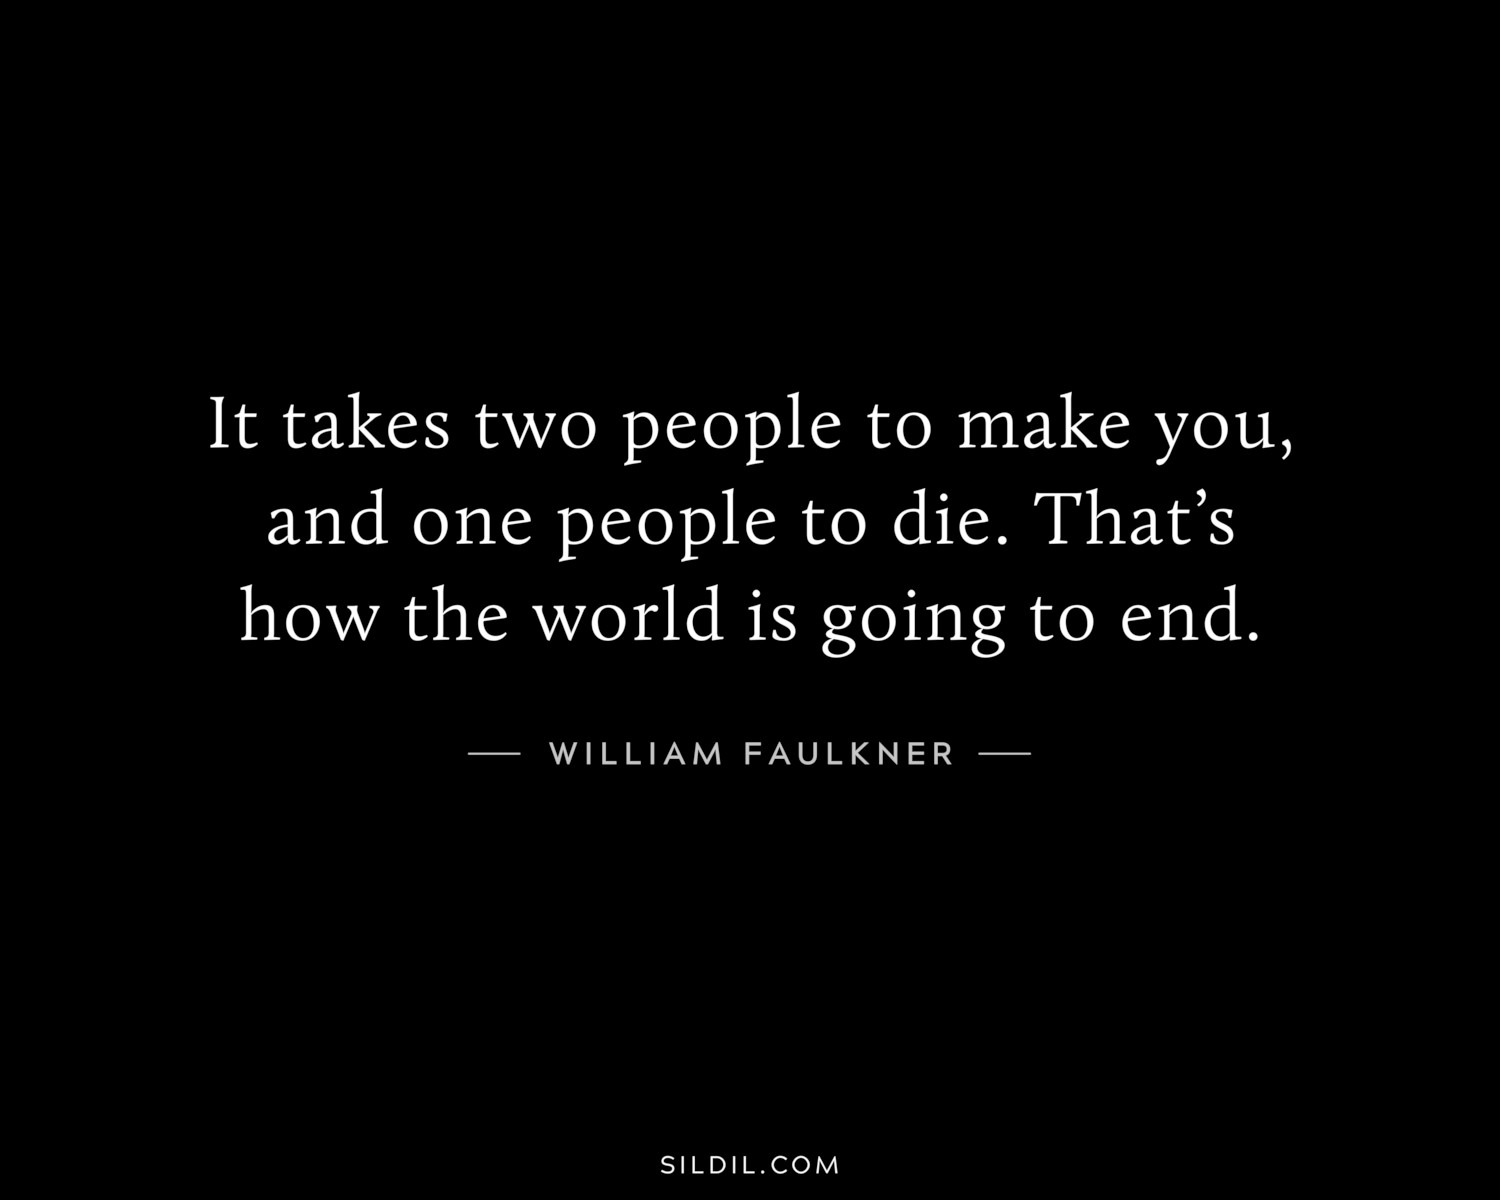 It takes two people to make you, and one people to die. That’s how the world is going to end.